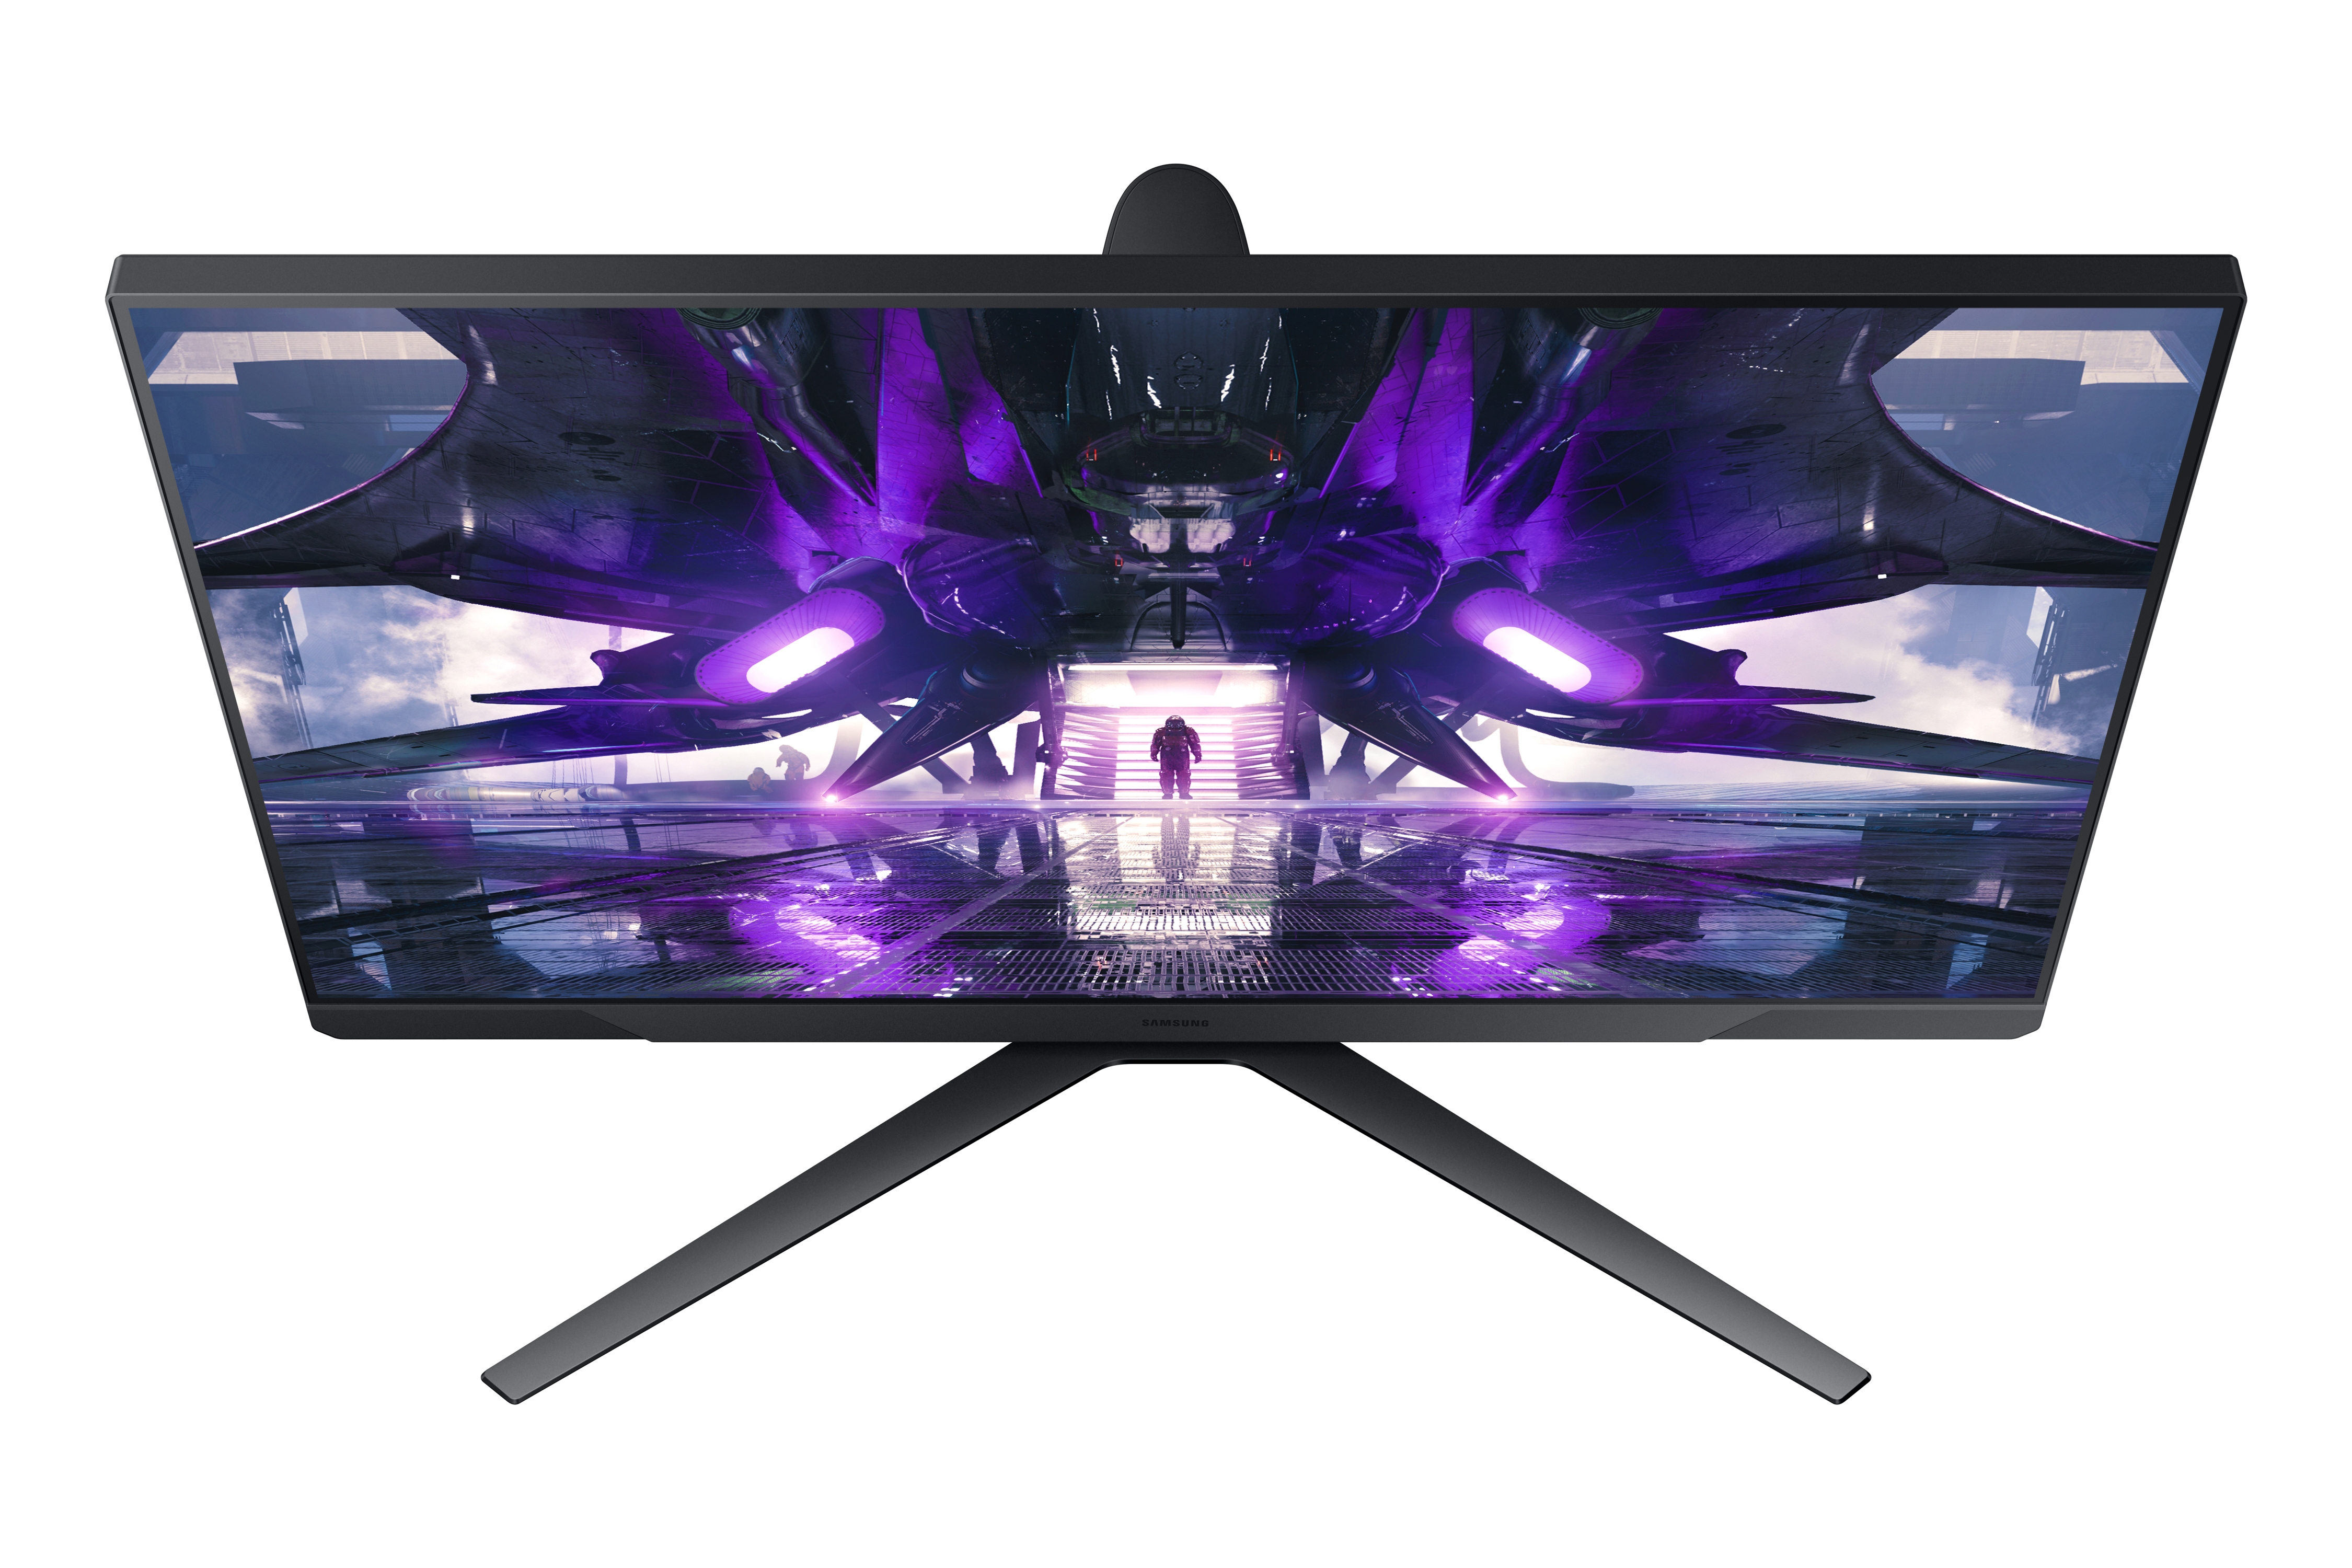 HP 27 IPS LED FHD FreeSync Monitor with Adjustable Height (HDMI